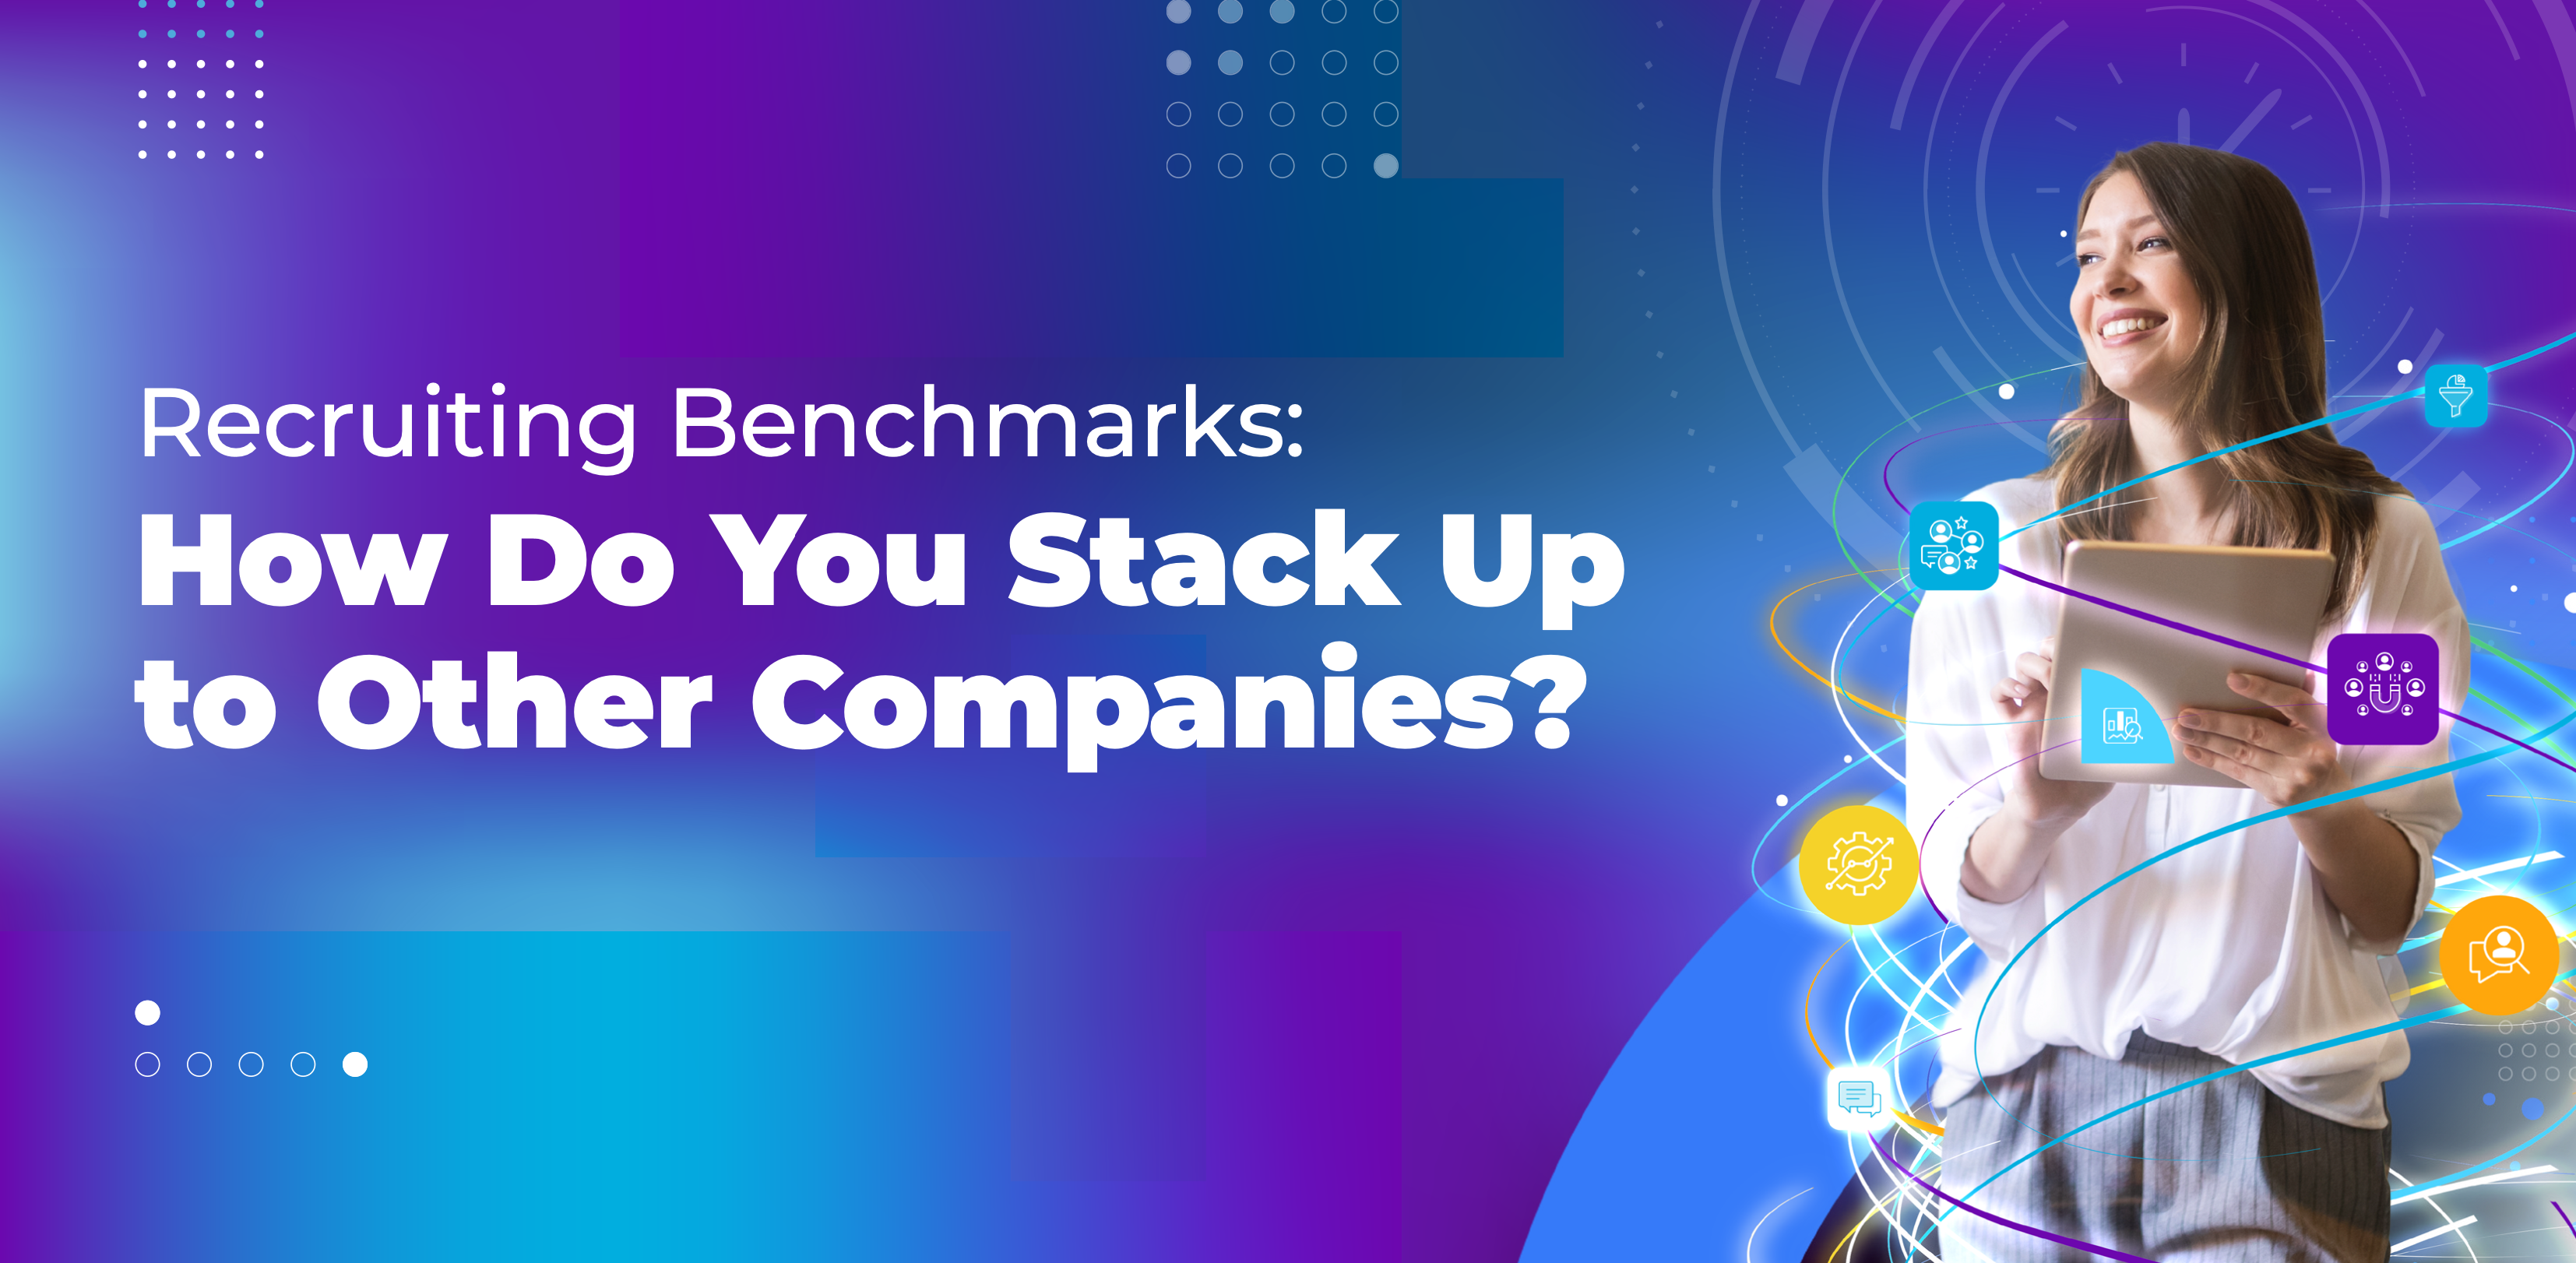 Recruiting Benchmarks: How Do You Stack Up to Other Companies?